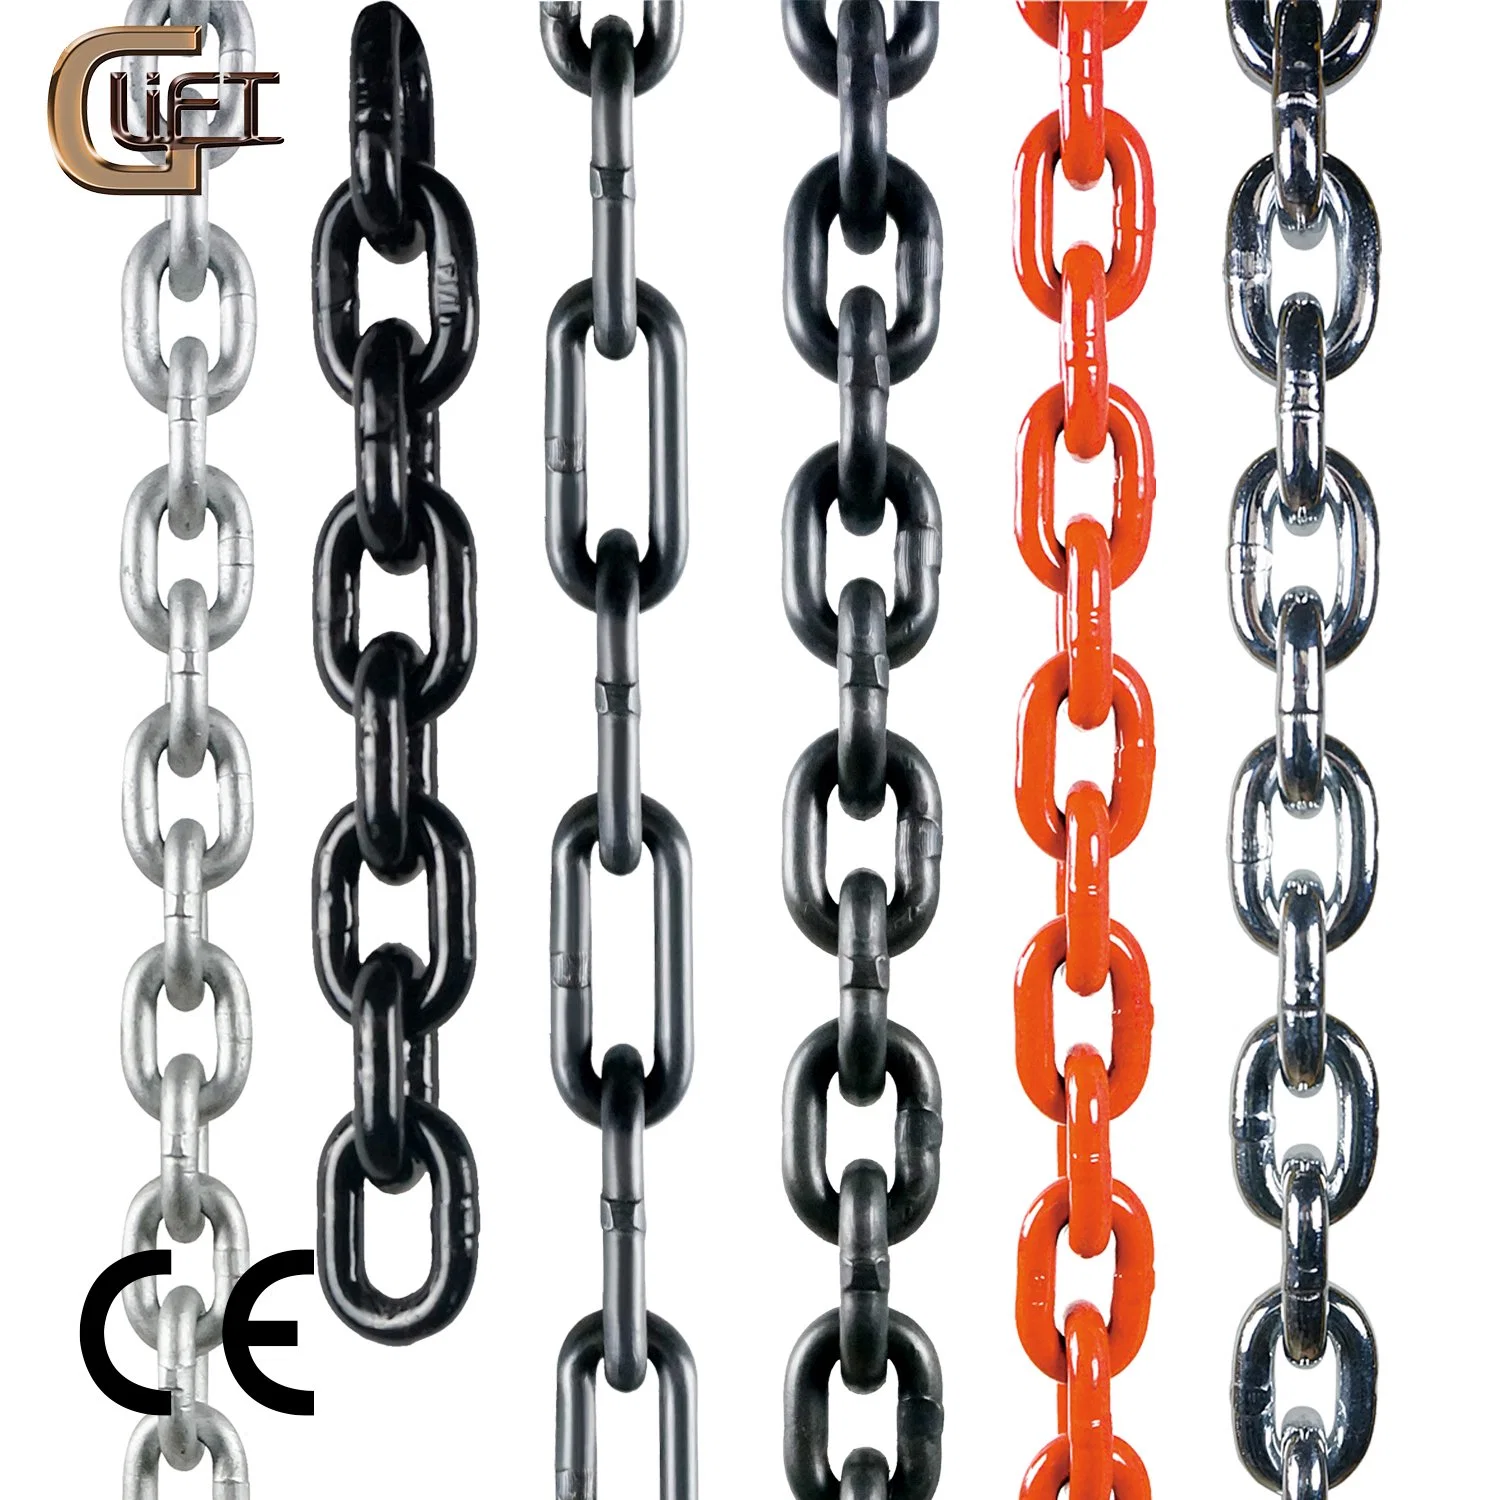 High Quality Chain Sling Long Chain for Chain Block Manufacturing Hoisting Chain with CE Certification (G100)